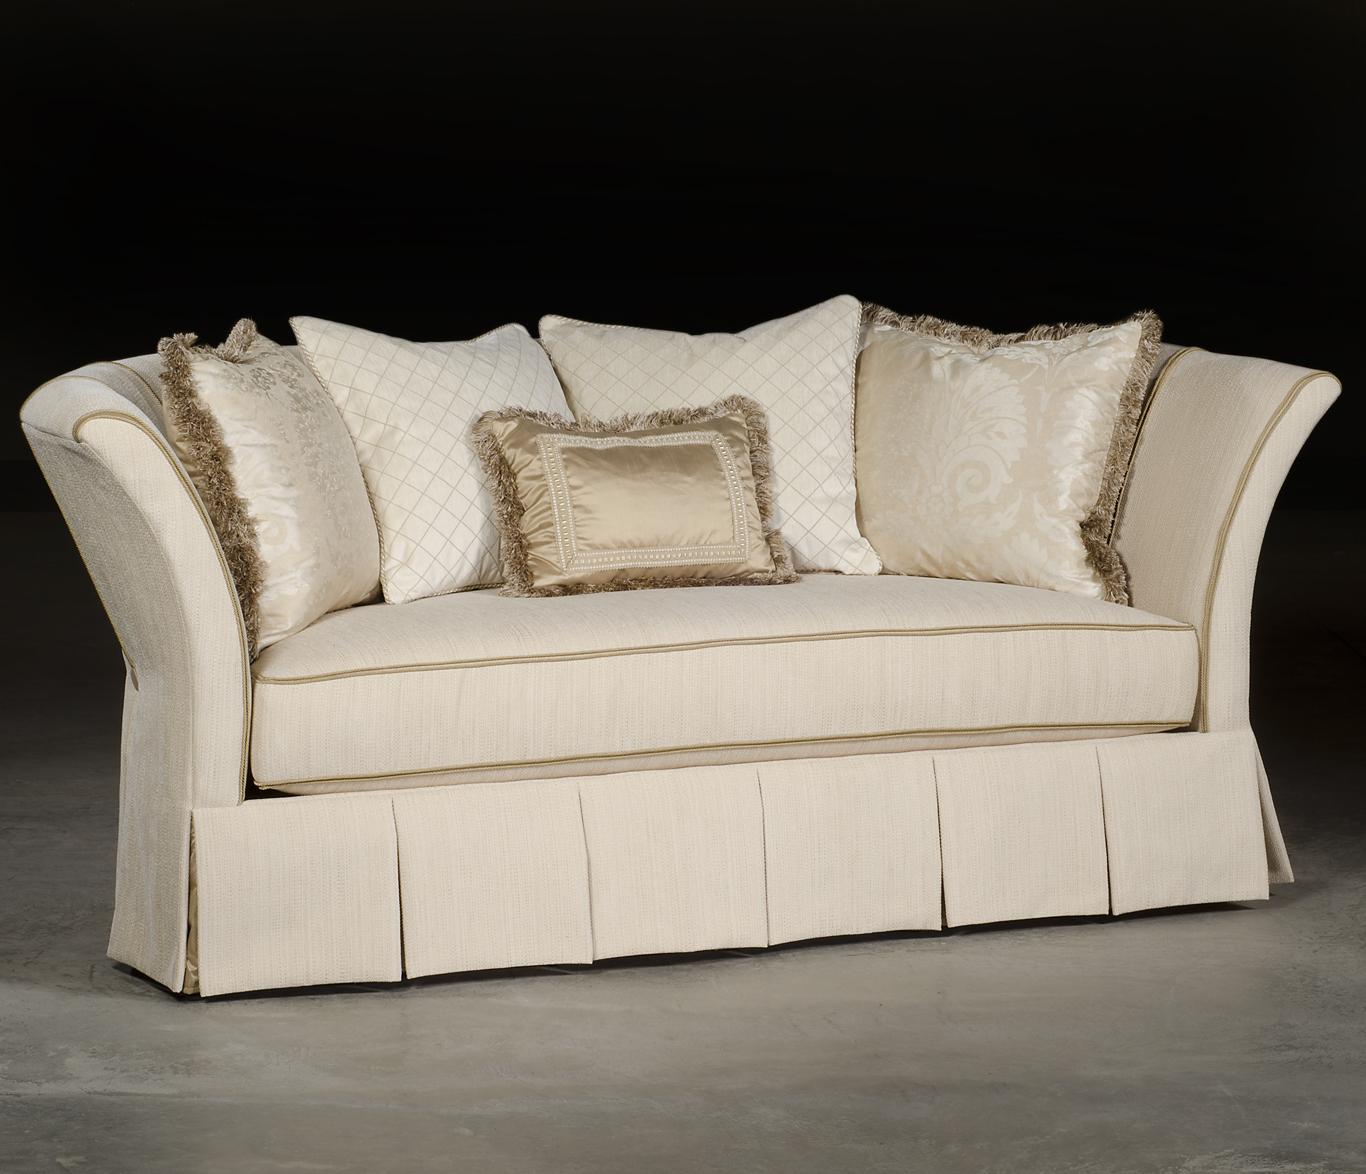 Traditional Settee Sofa with Tuxedo Styled Seat Back